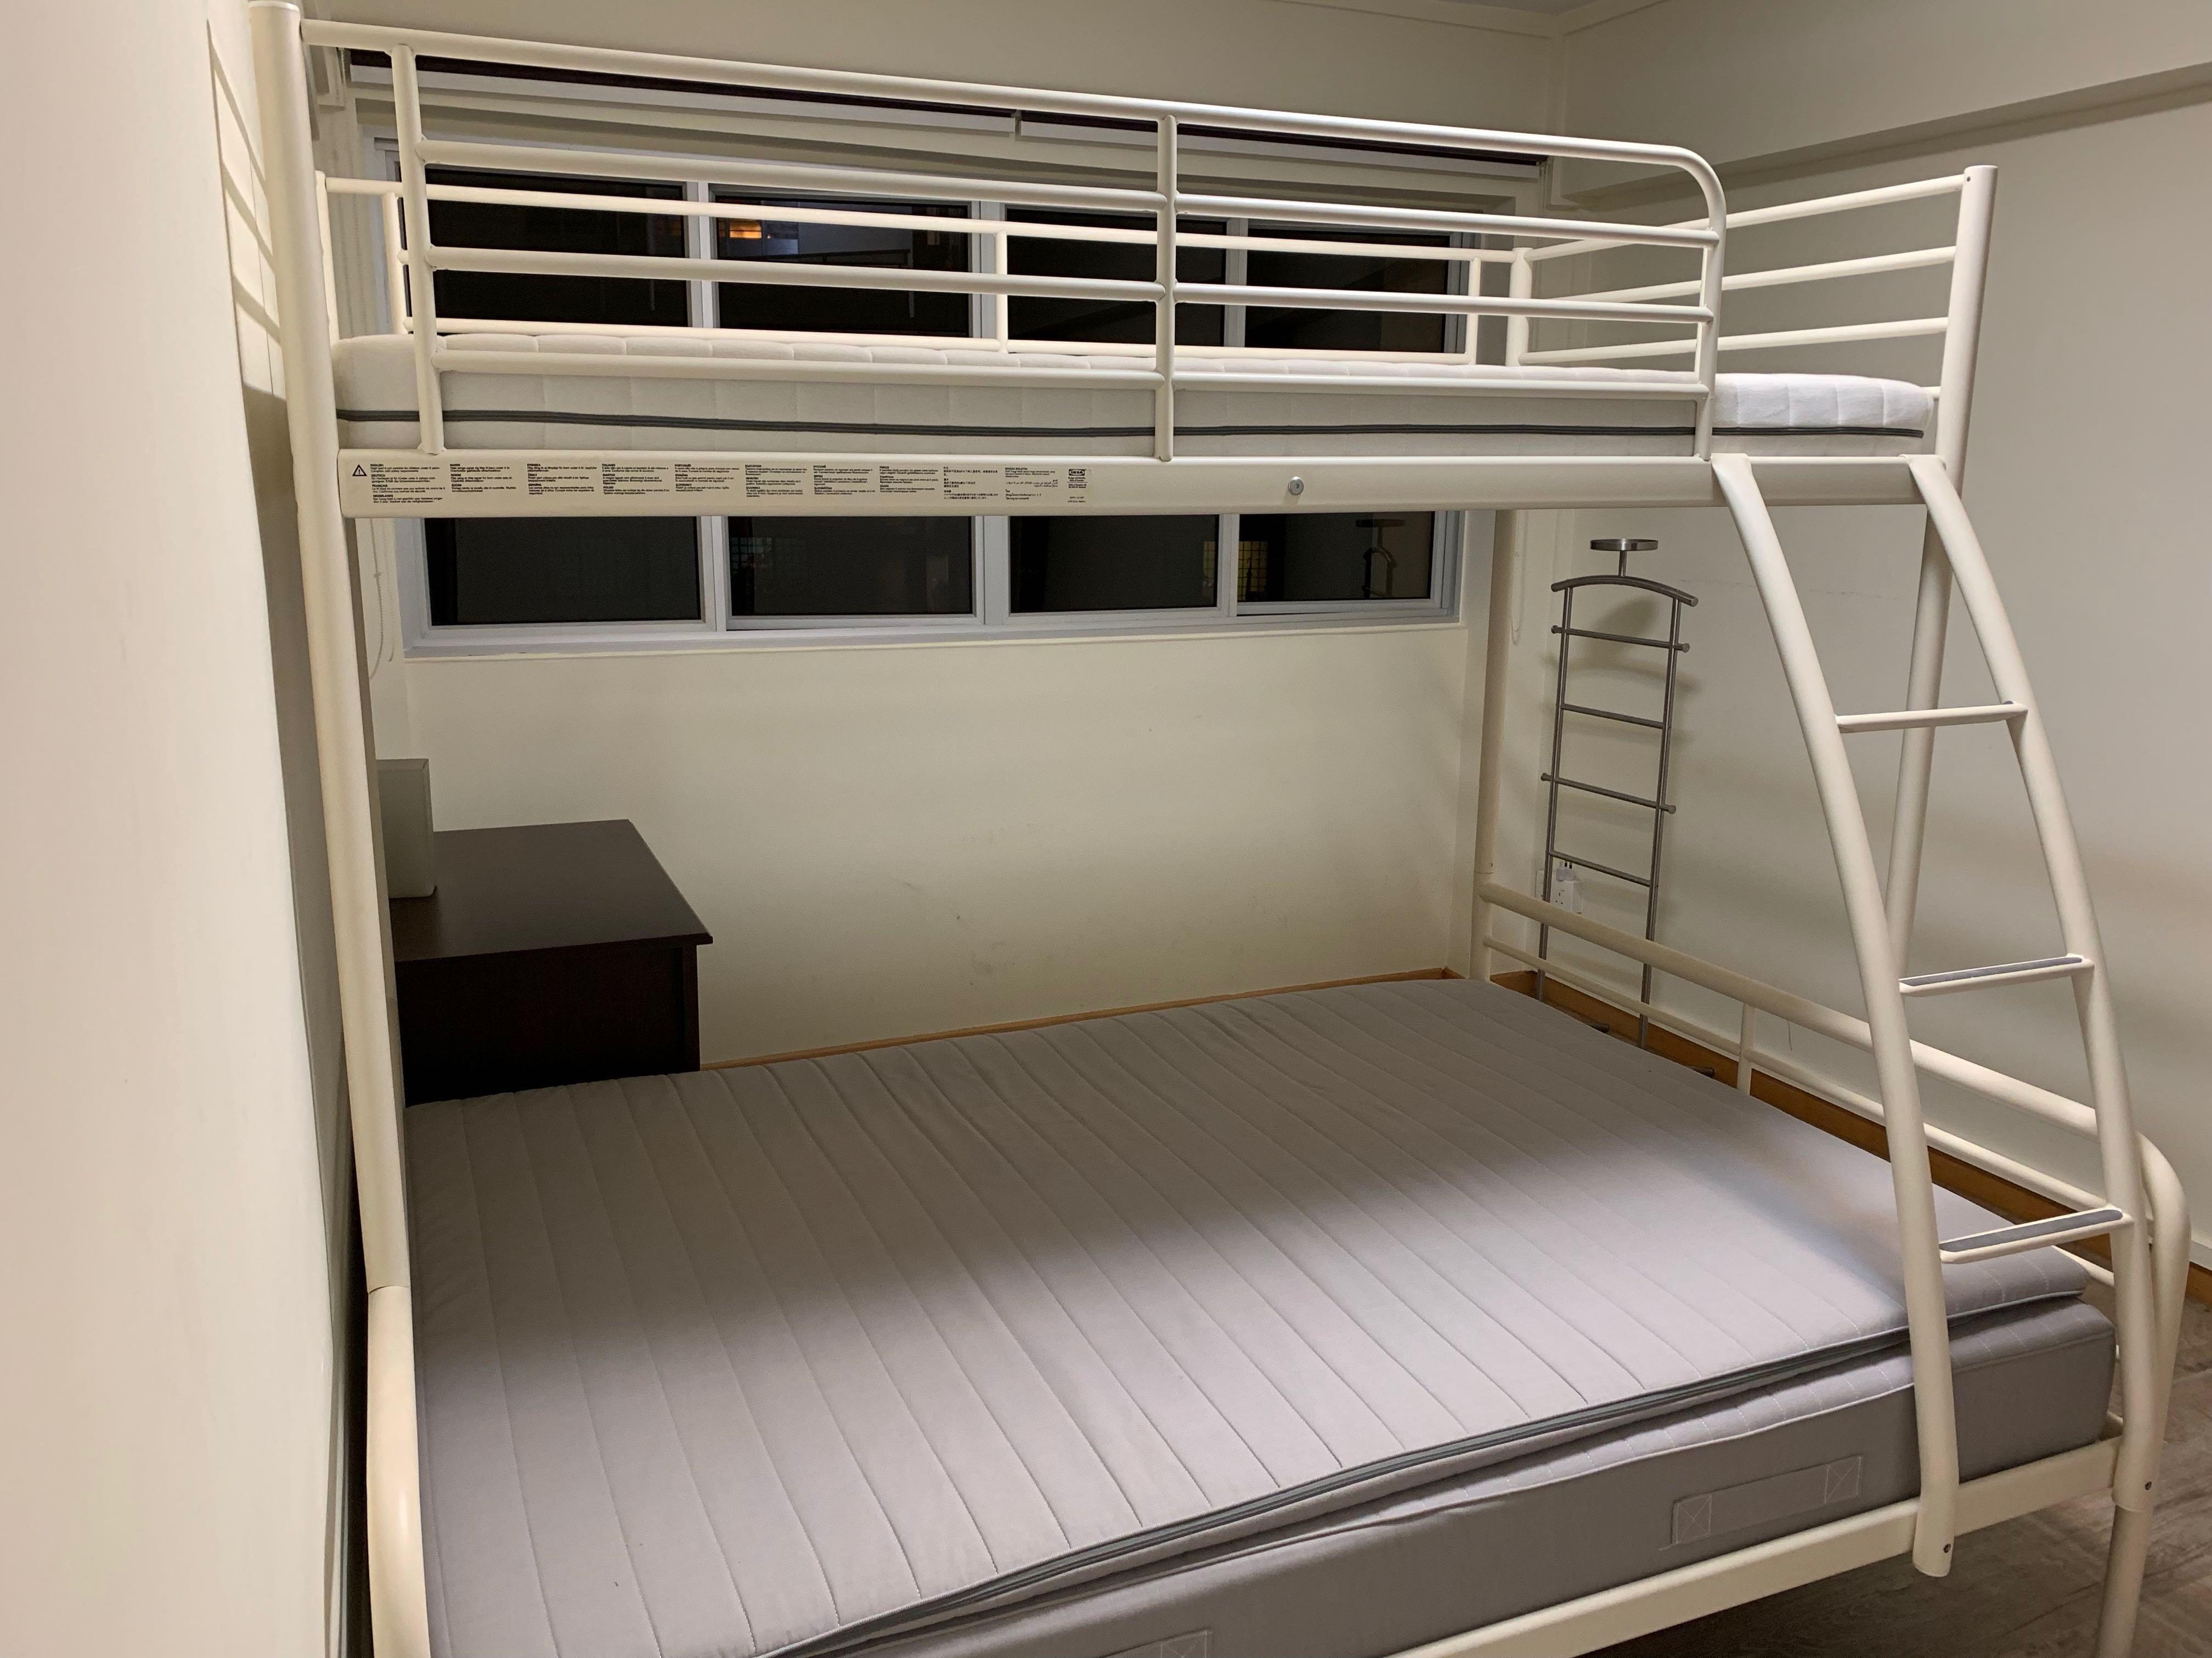 double and single bunk bed with mattresses